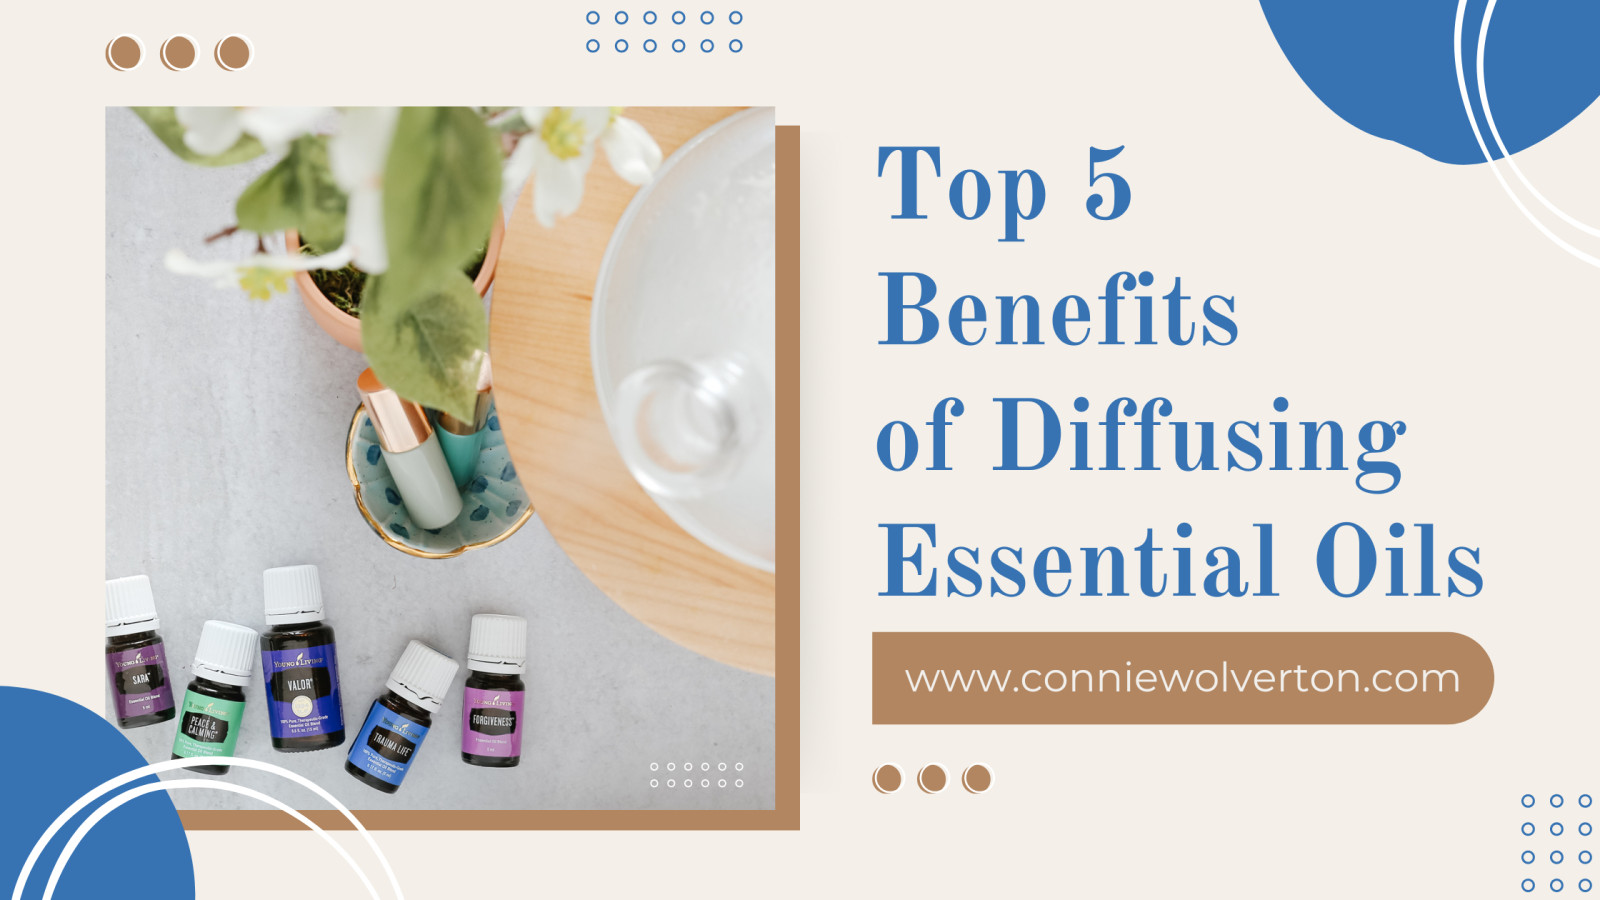 The Top 5 Benefits of Diffusing Essential Oils